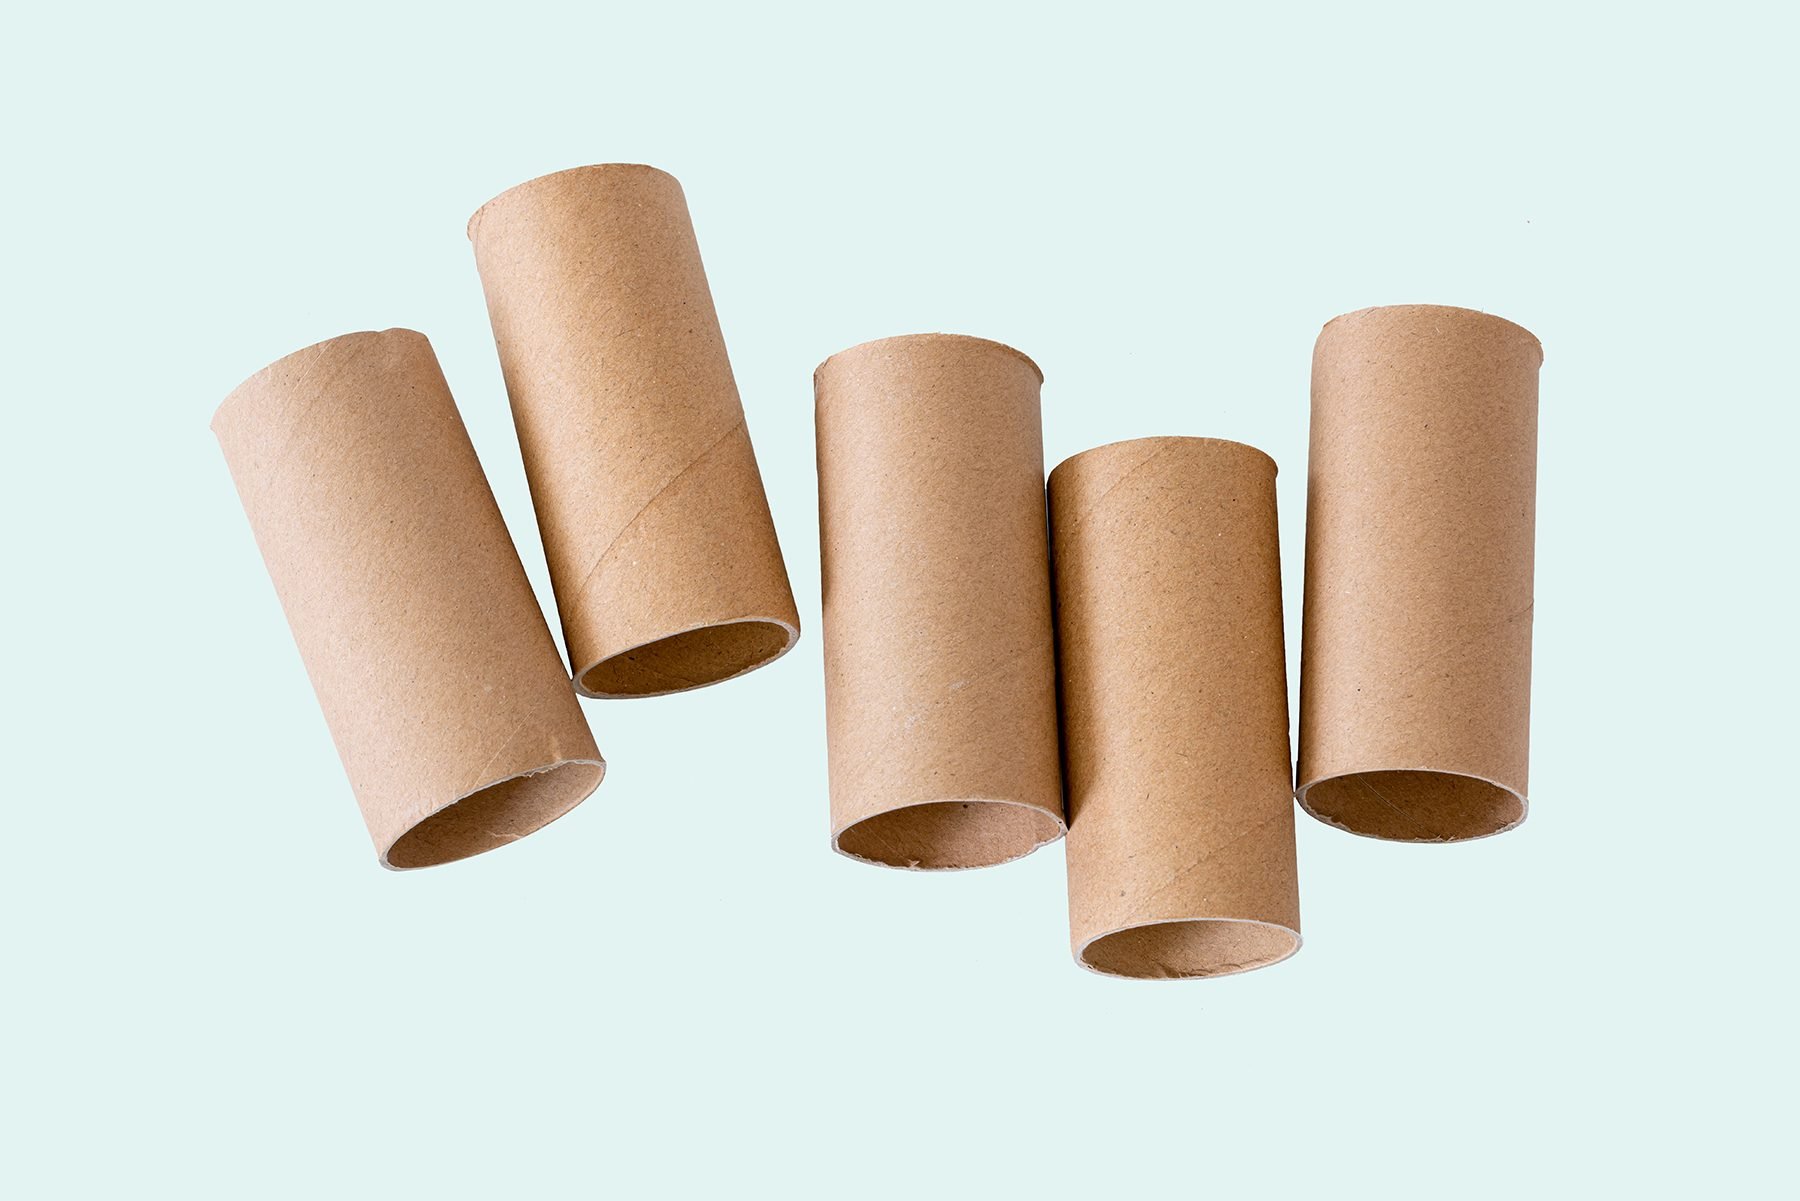 Tubes Cardboard Paper Tube Crafts Craft Roll Round Towel Rolls